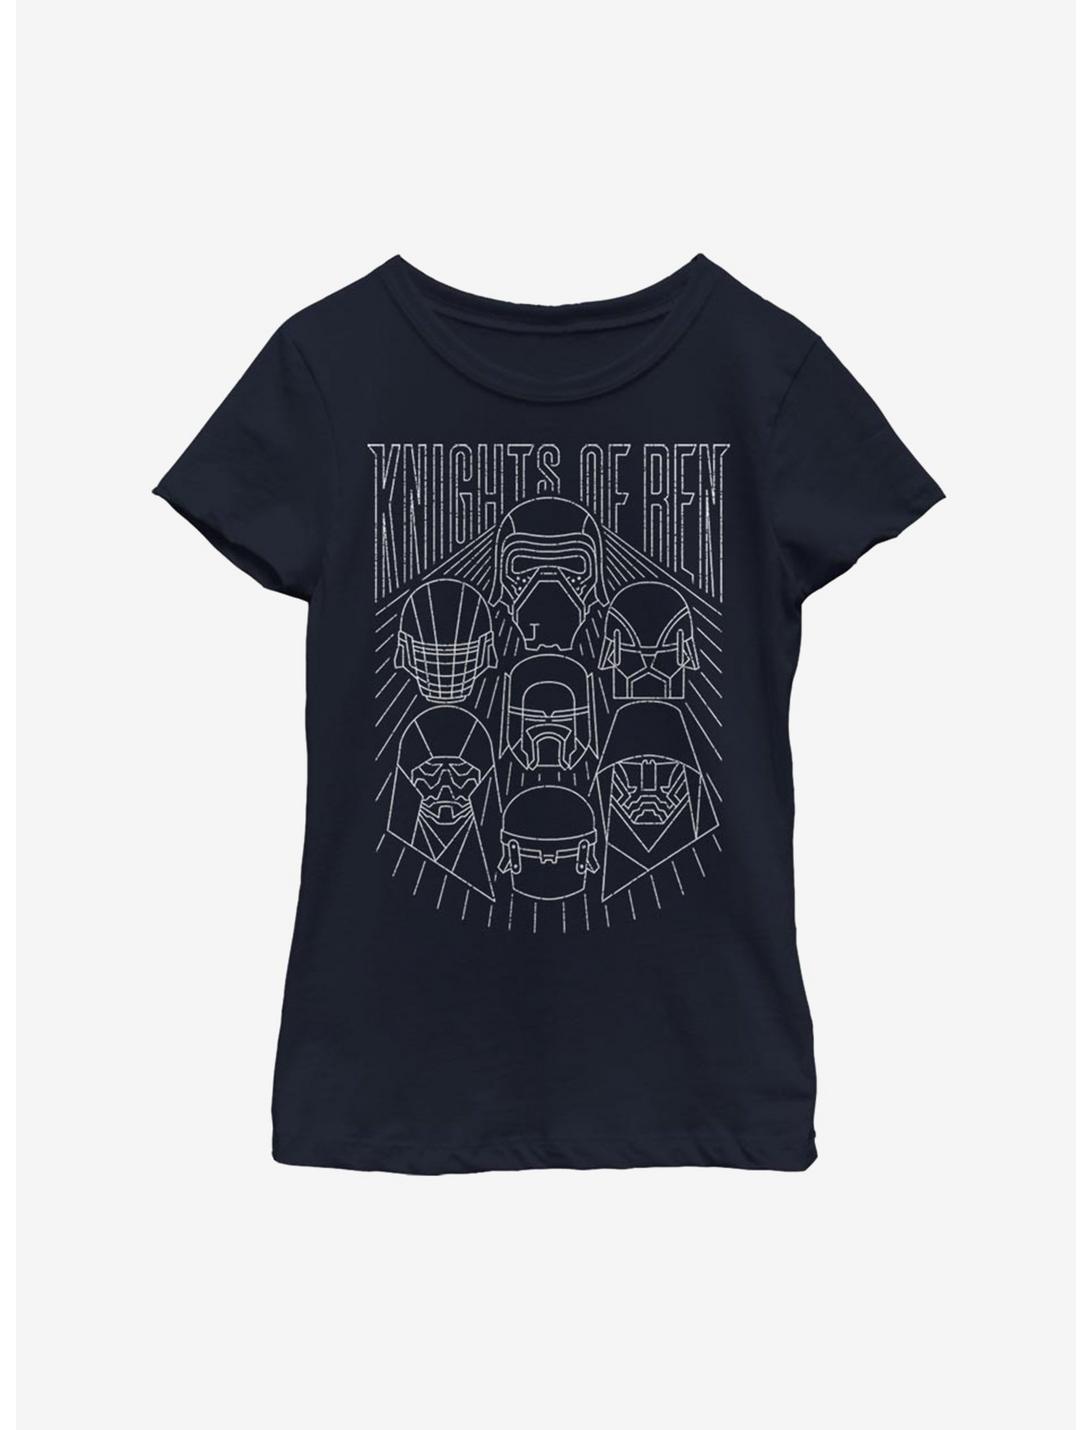 Star Wars Episode IX The Rise Of Skywalker Simple Outlines Youth Girls T-Shirt, NAVY, hi-res